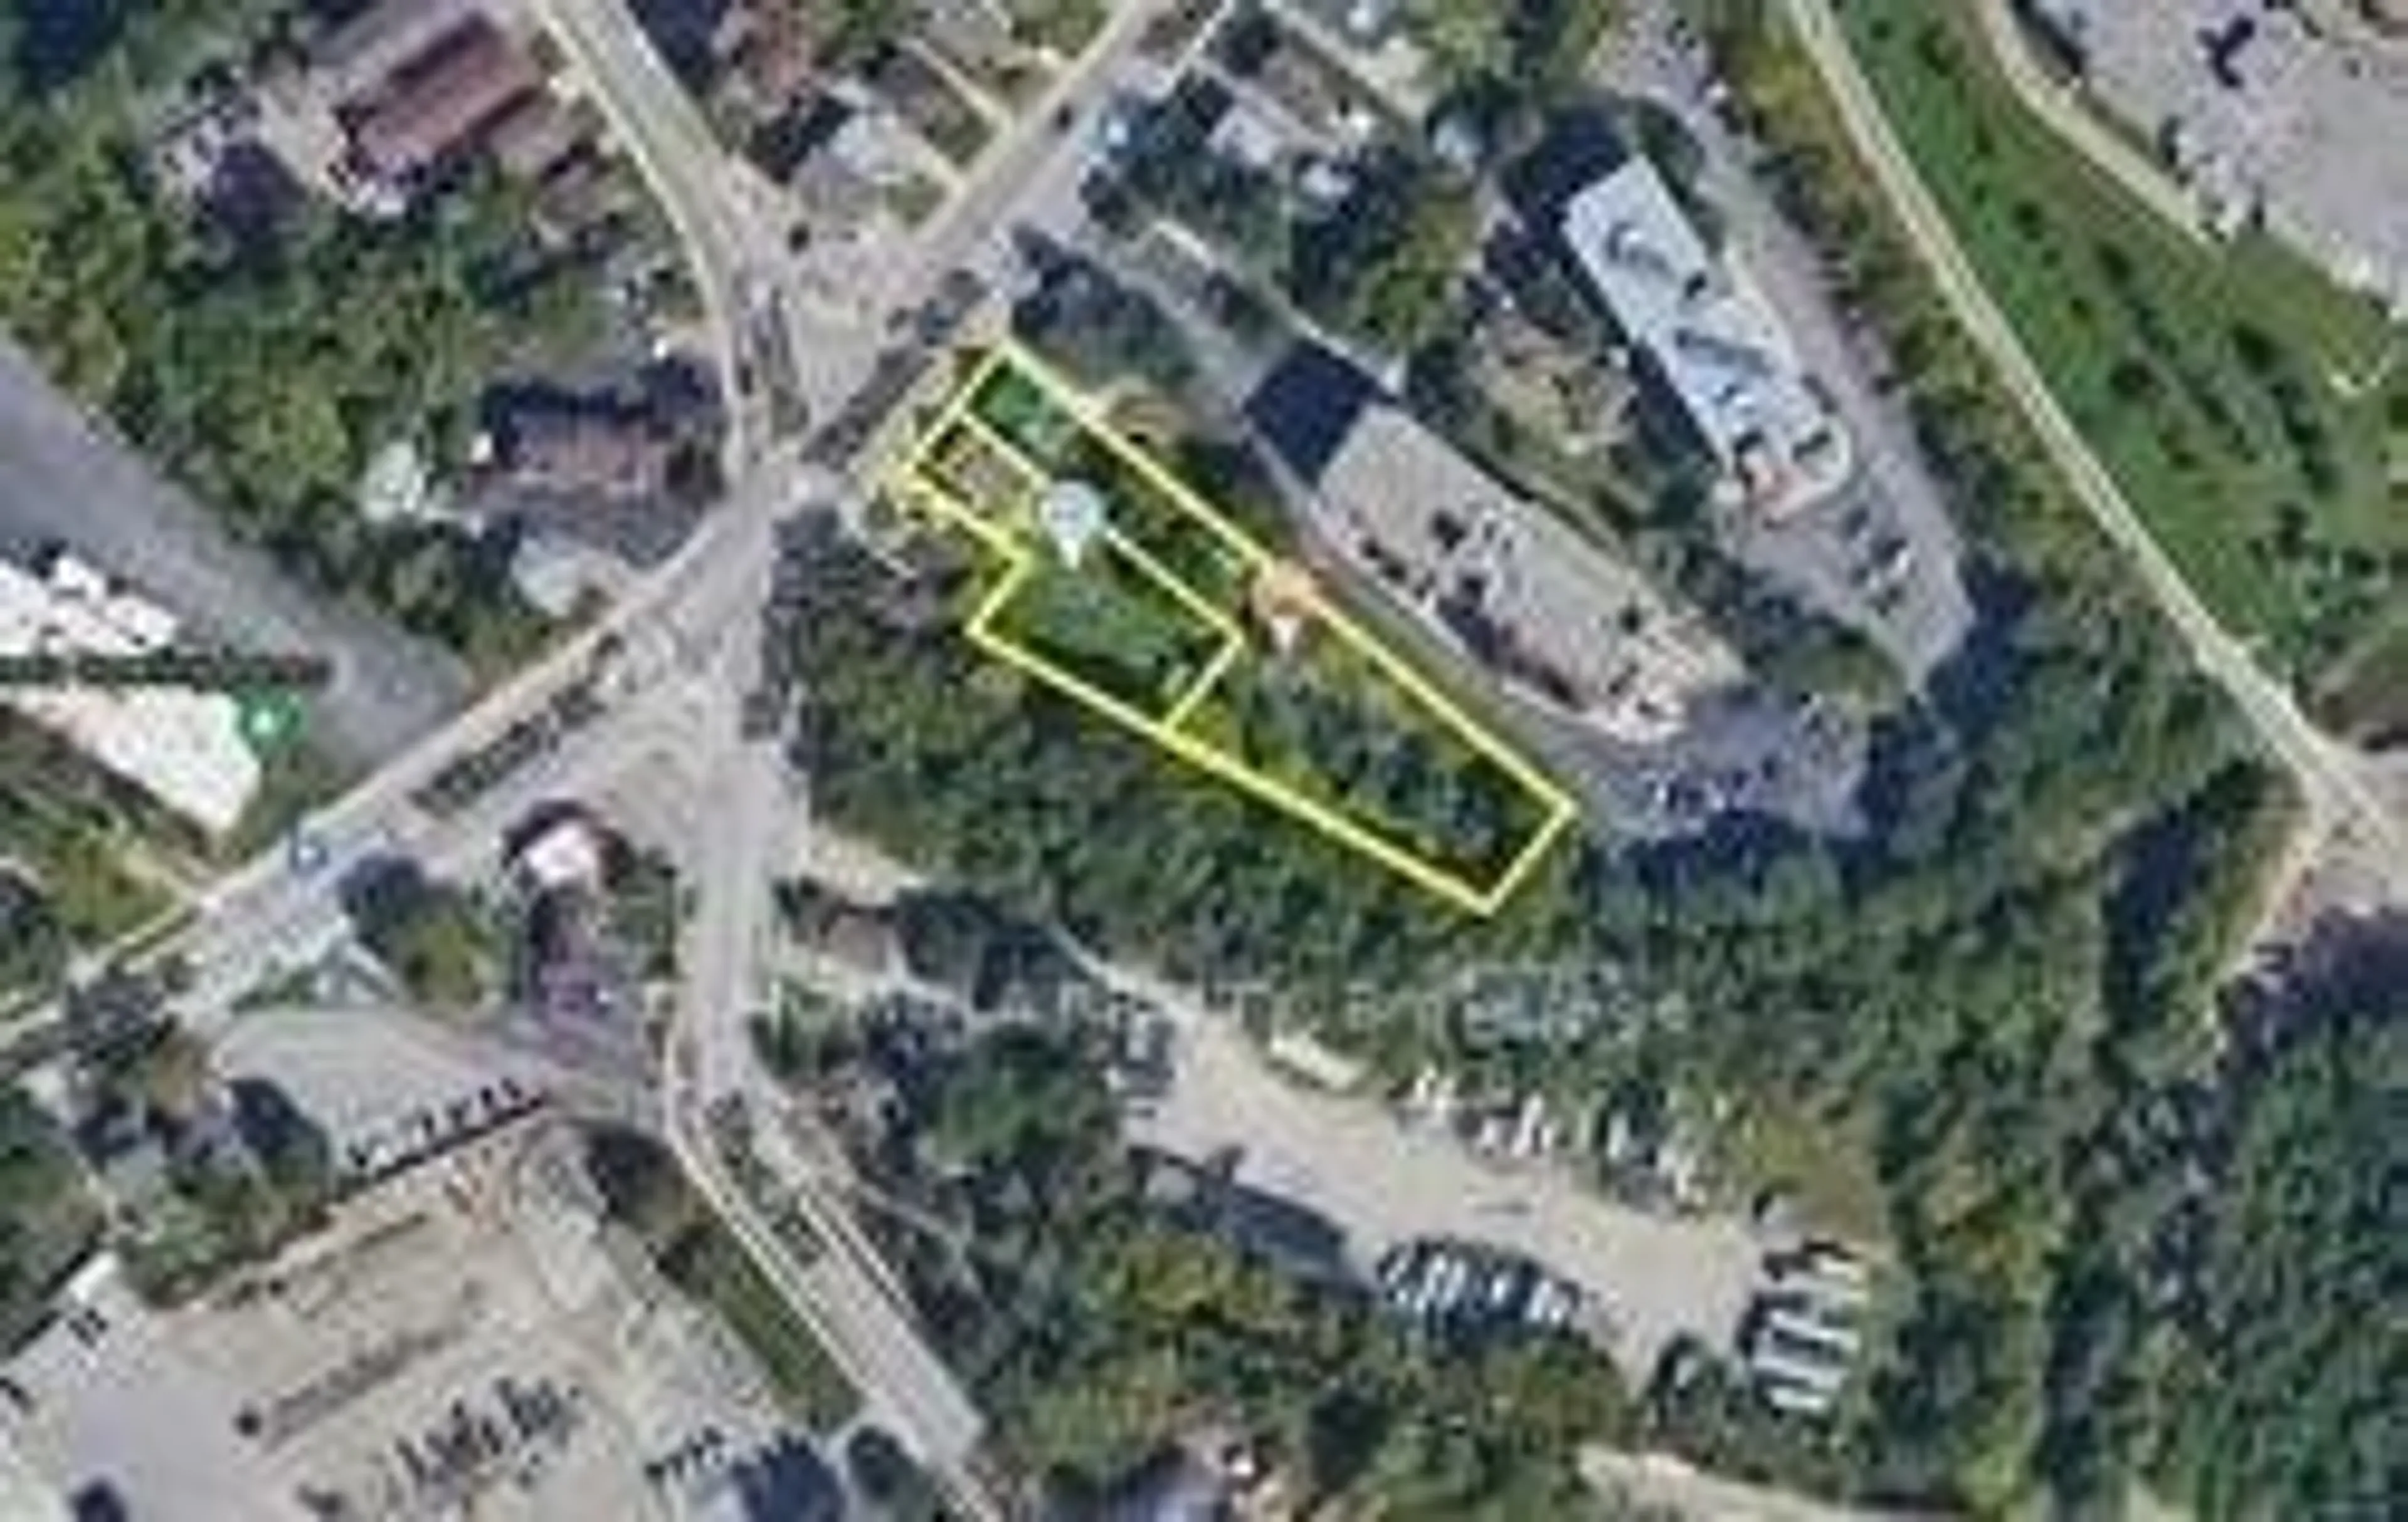 Picture of a map for 251 Victoria St, Kitchener Ontario N2G 2C1